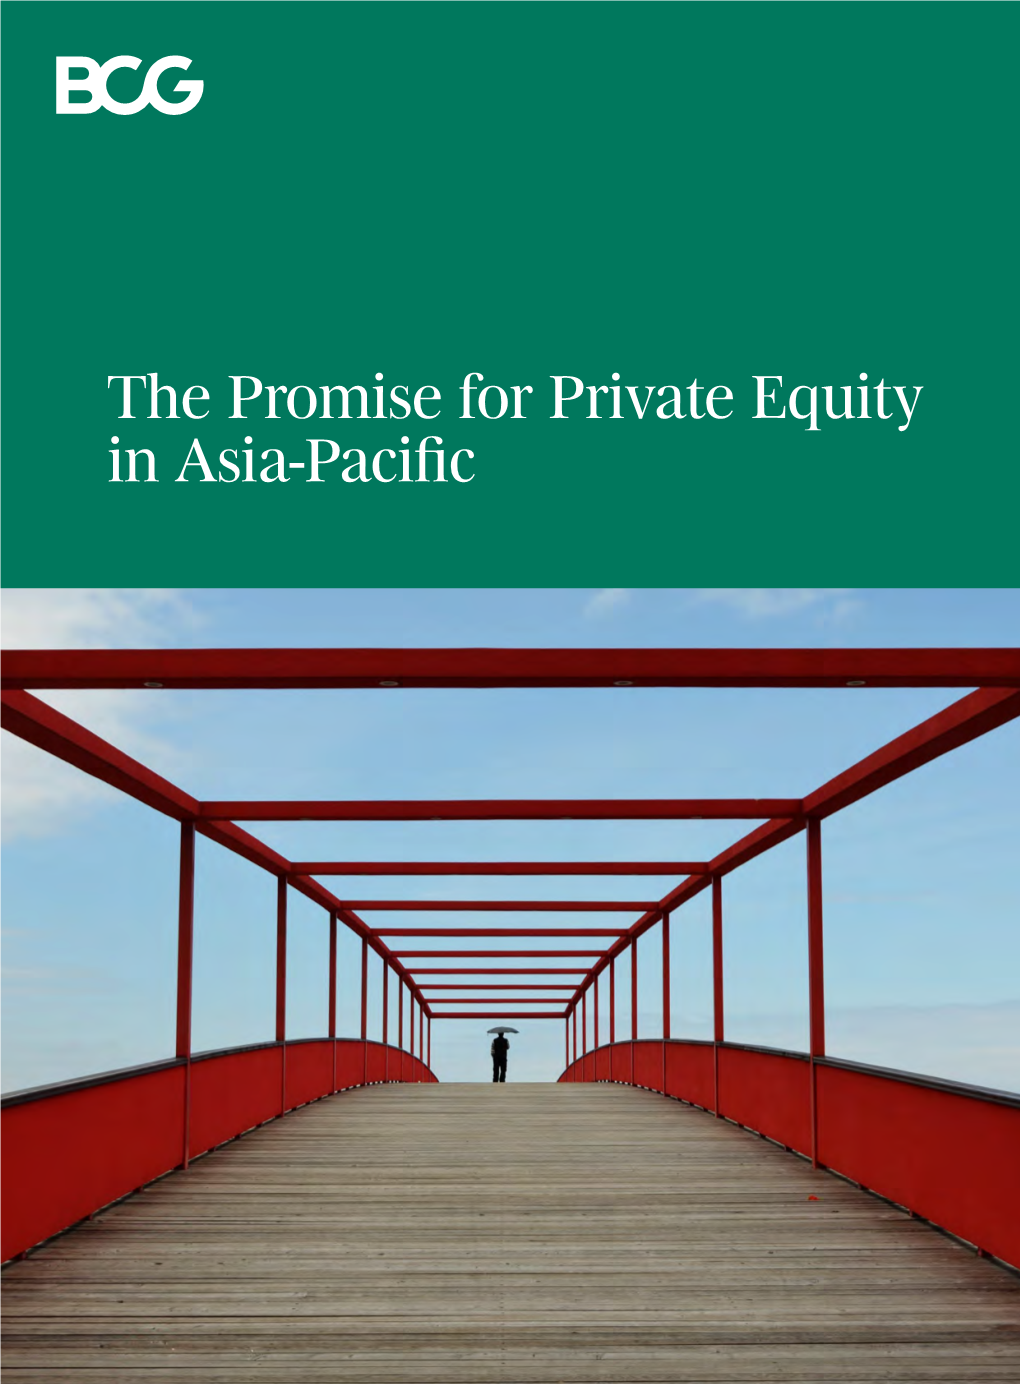 The Promise for Private Equity in Asia-Pacific